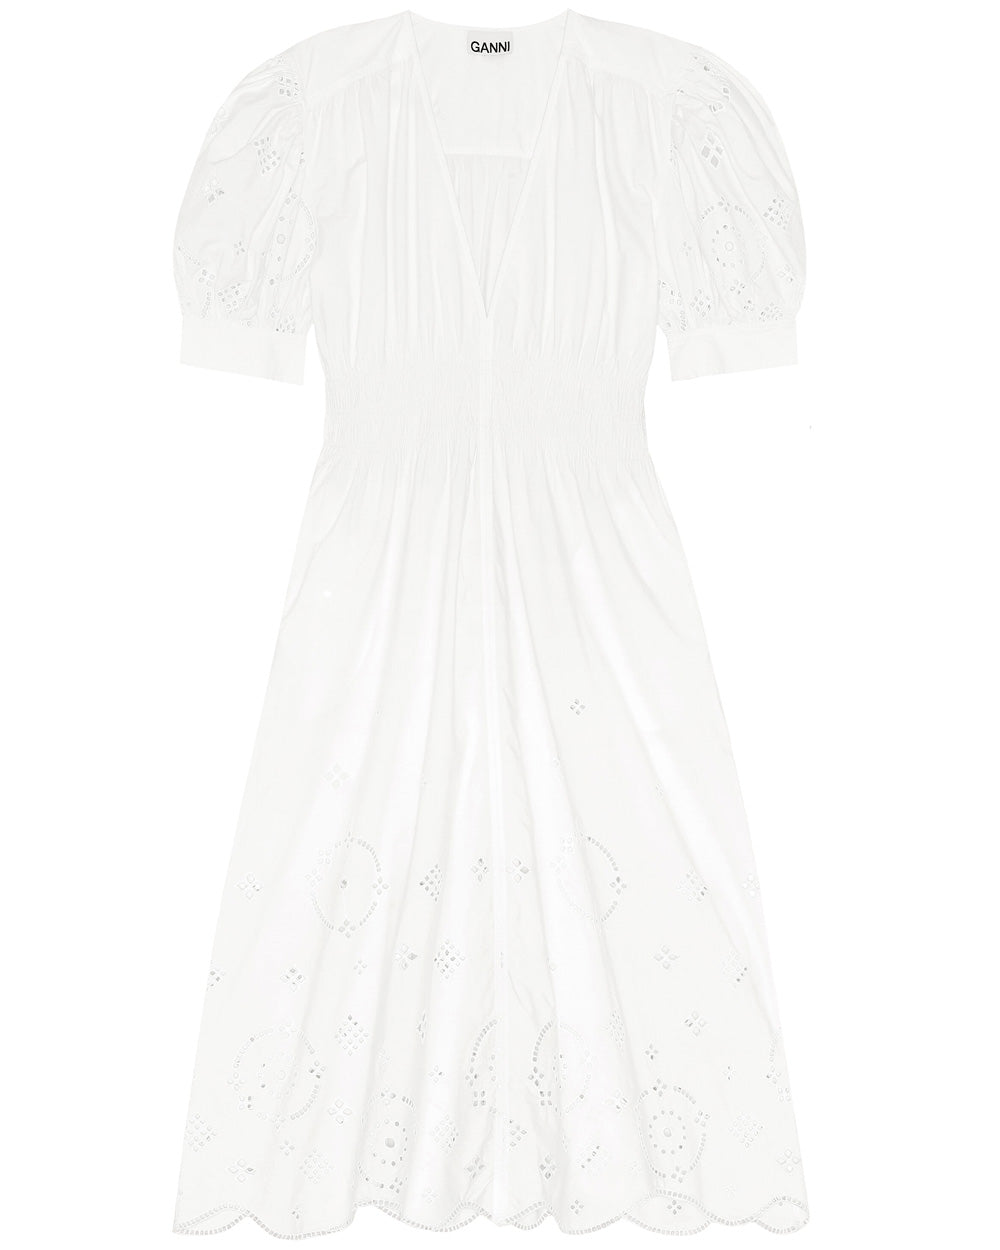 Bright White Broderie Anglaise Maxi Dress